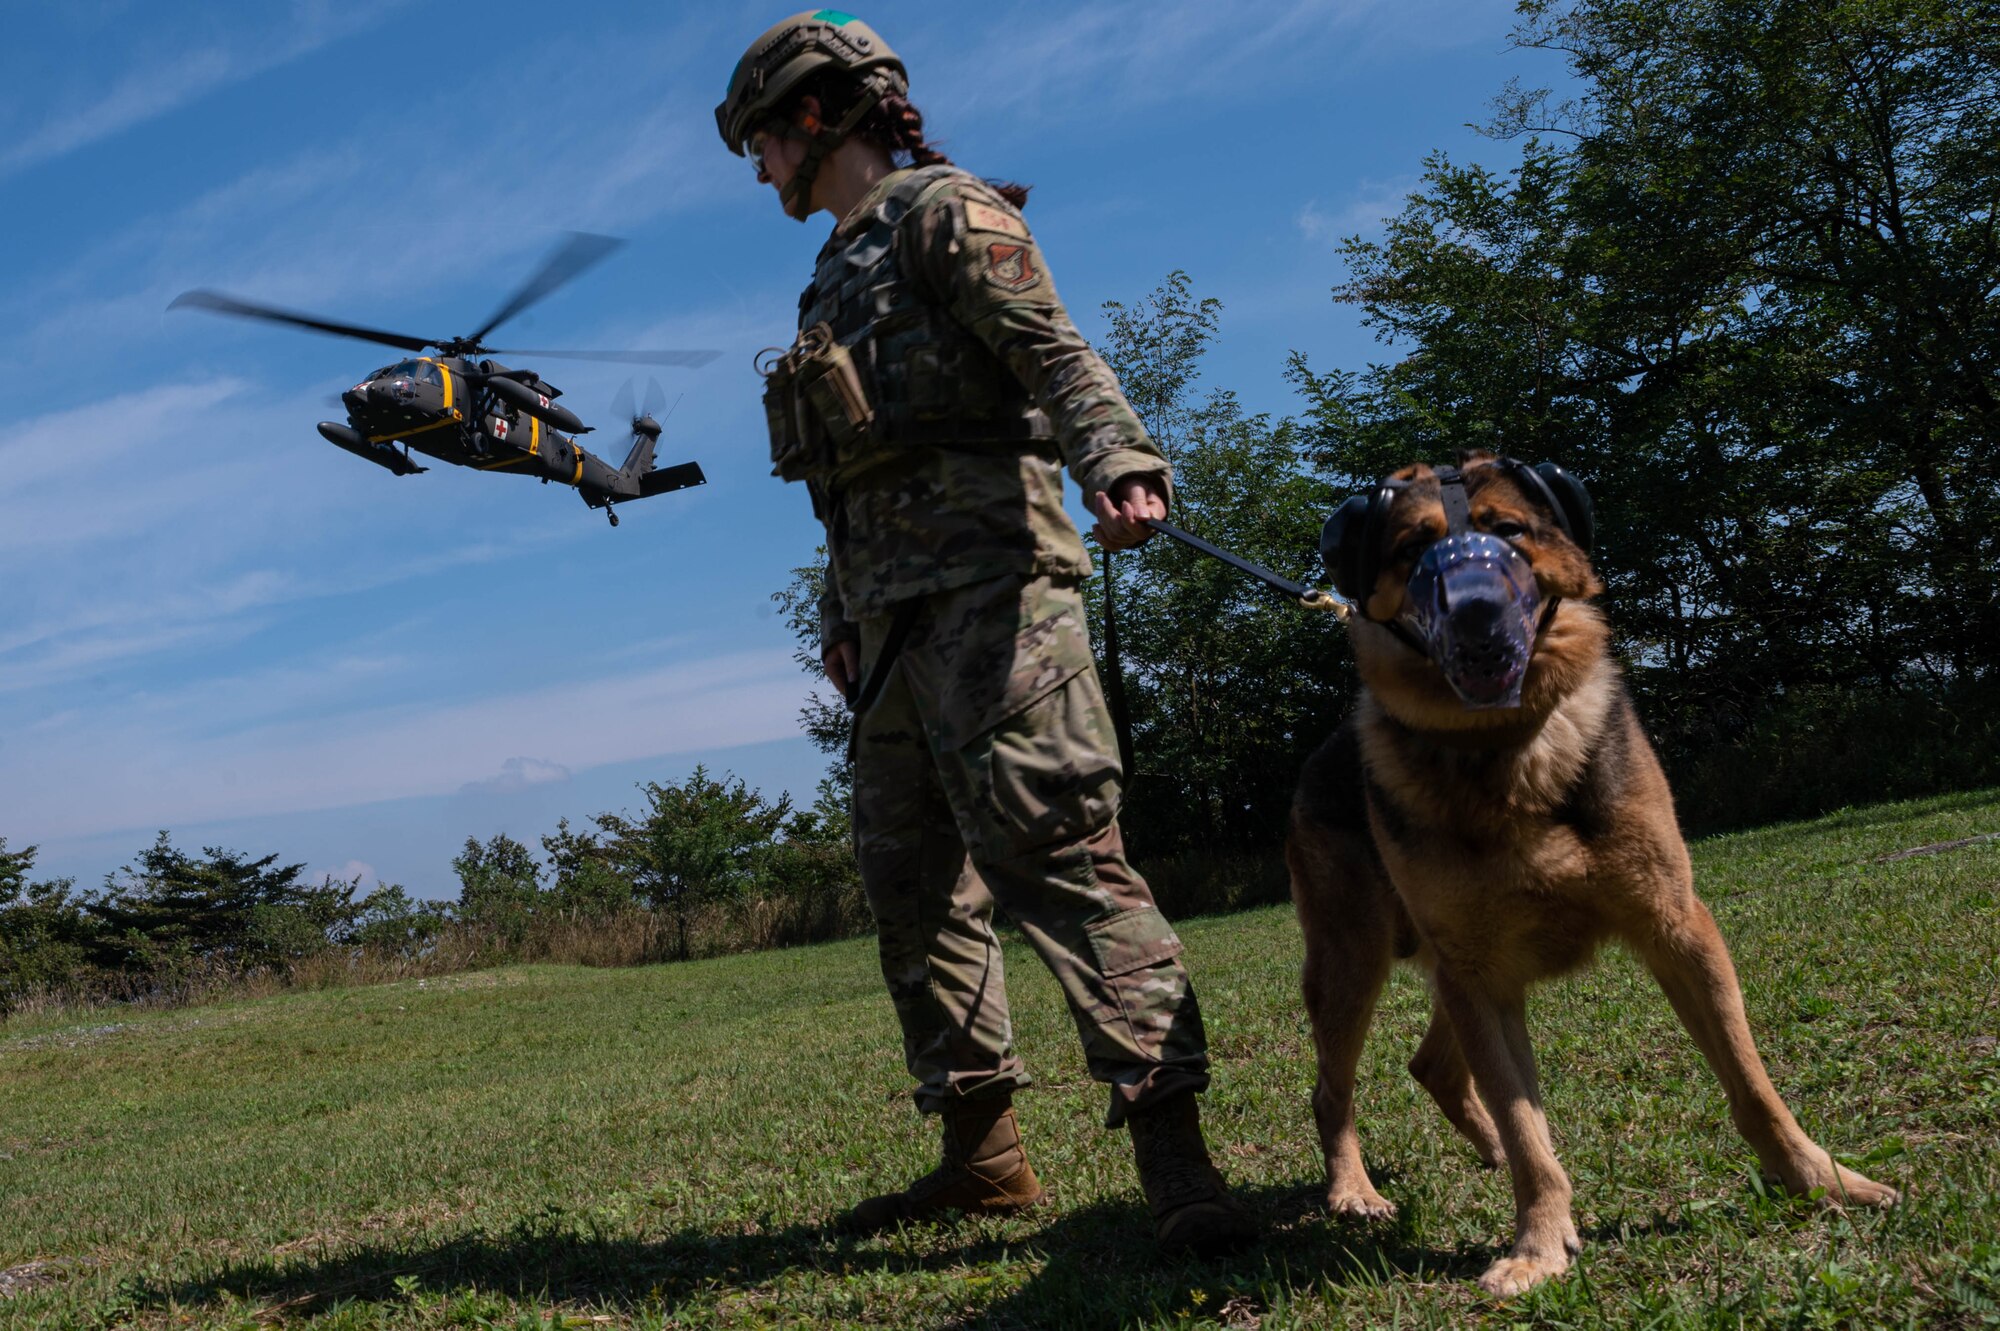 Senior Airman Cierra Ratliff, 51st Security Forces squadron, military working dog handler, stands alongside MWD Benny as she awaits the landing of a U.S. Army HH-60 Black Hawk